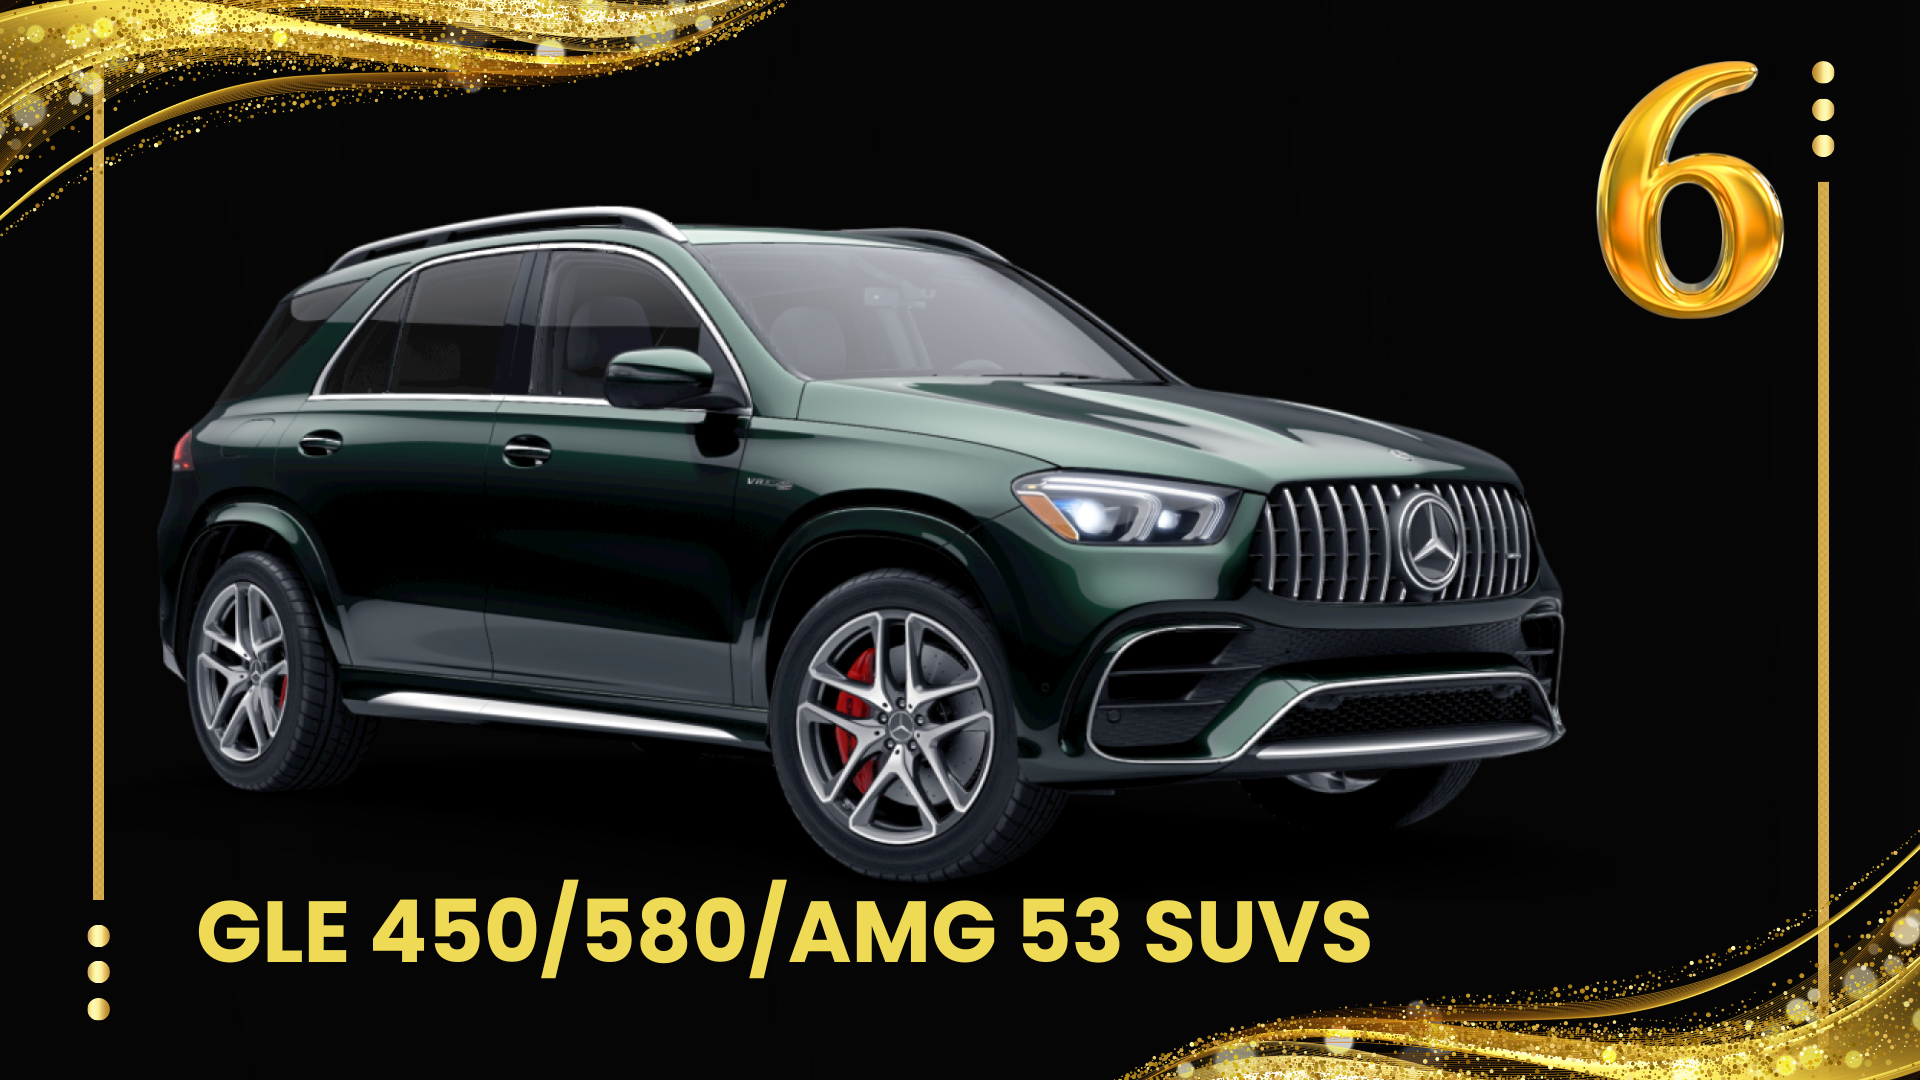 AMG GLE 63 qualifies for section 179 tax credit